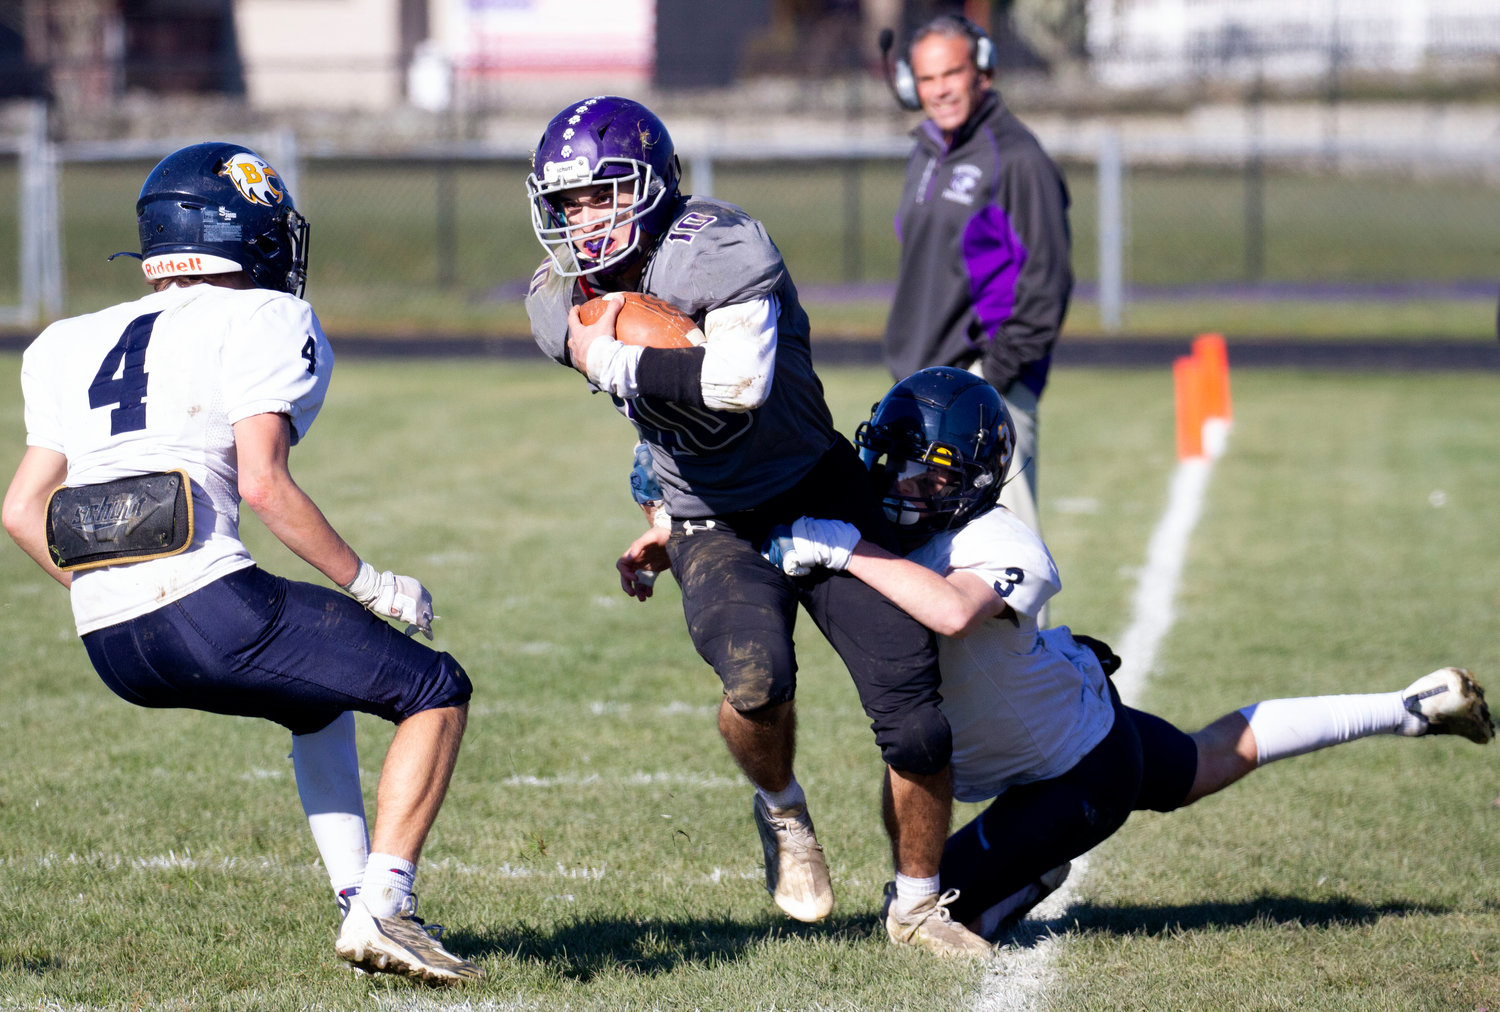 Running back Ben Colouro runs up the sidelines after breaking a tackle in the third quarter.